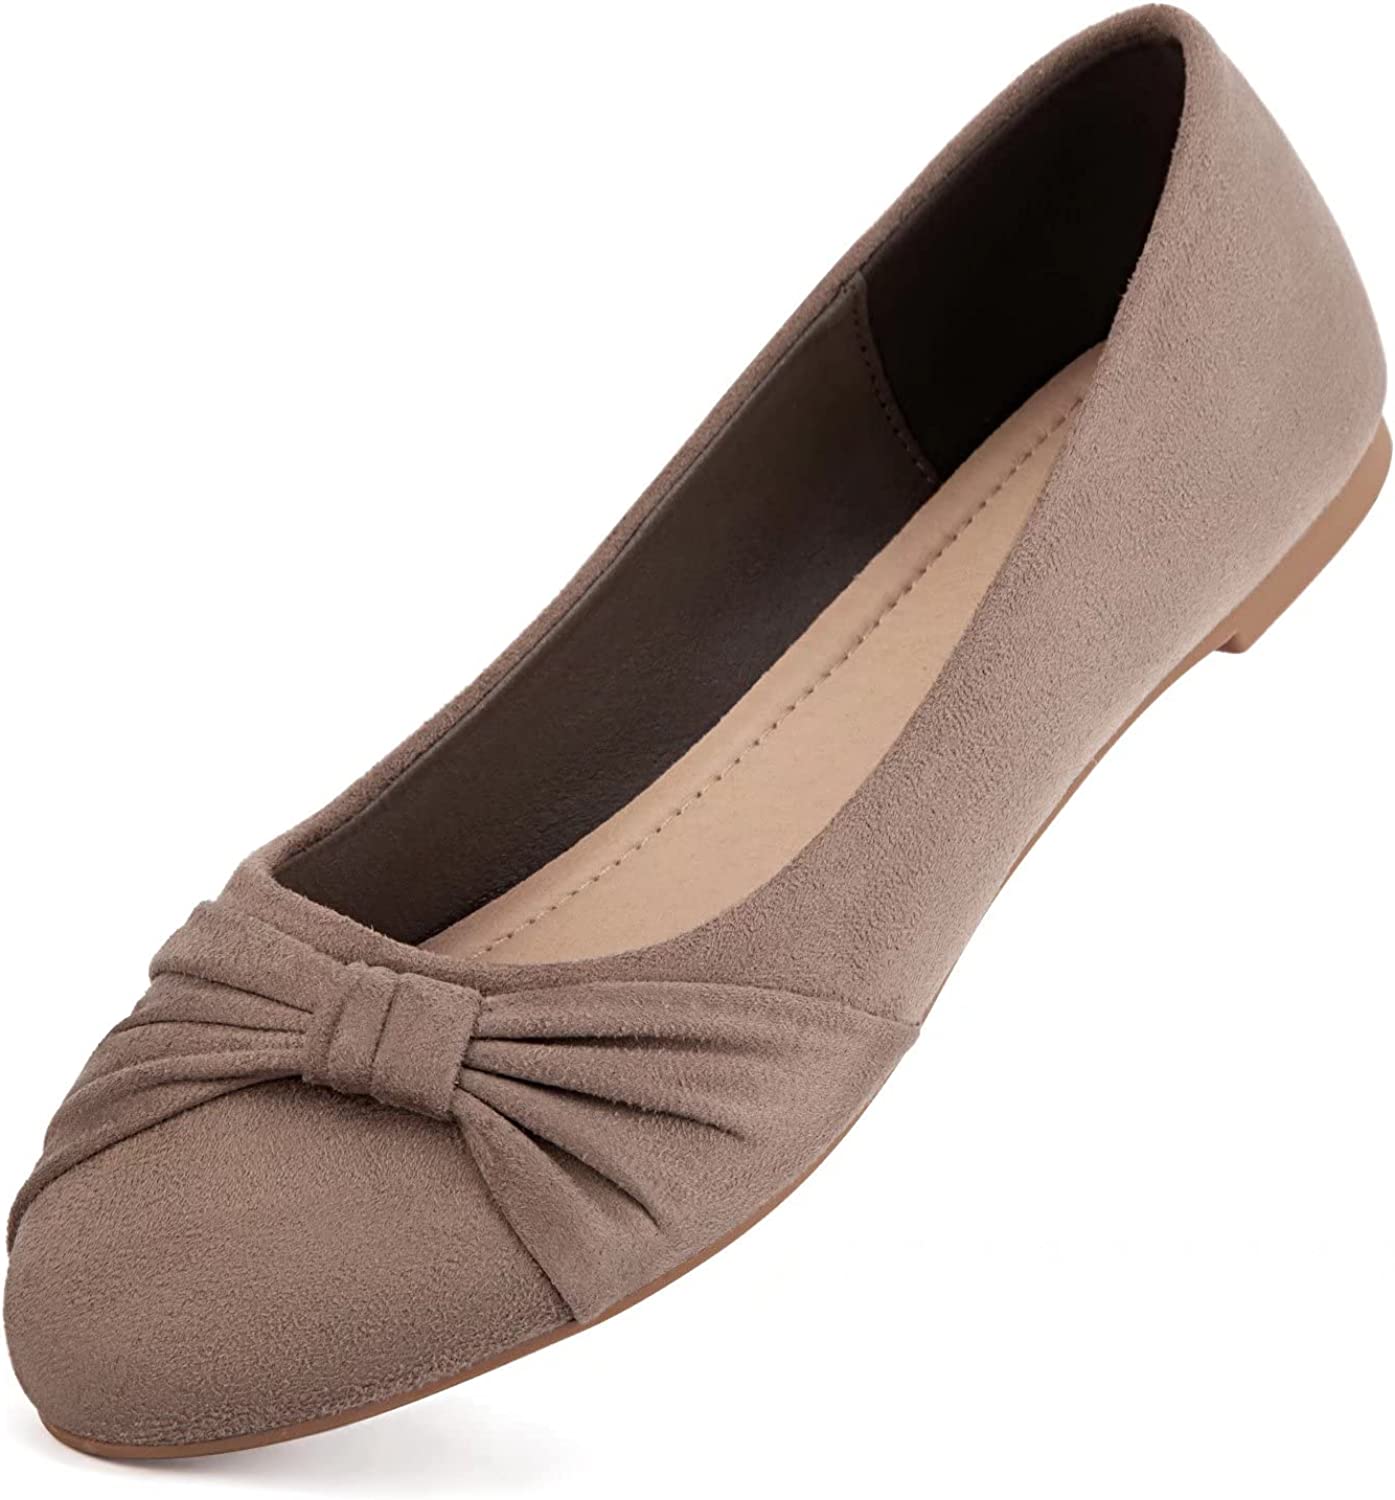 MaxMuxun Womens Ballet Flat Slip On Bow Tie Ballet Pumps Dolly Shoes 